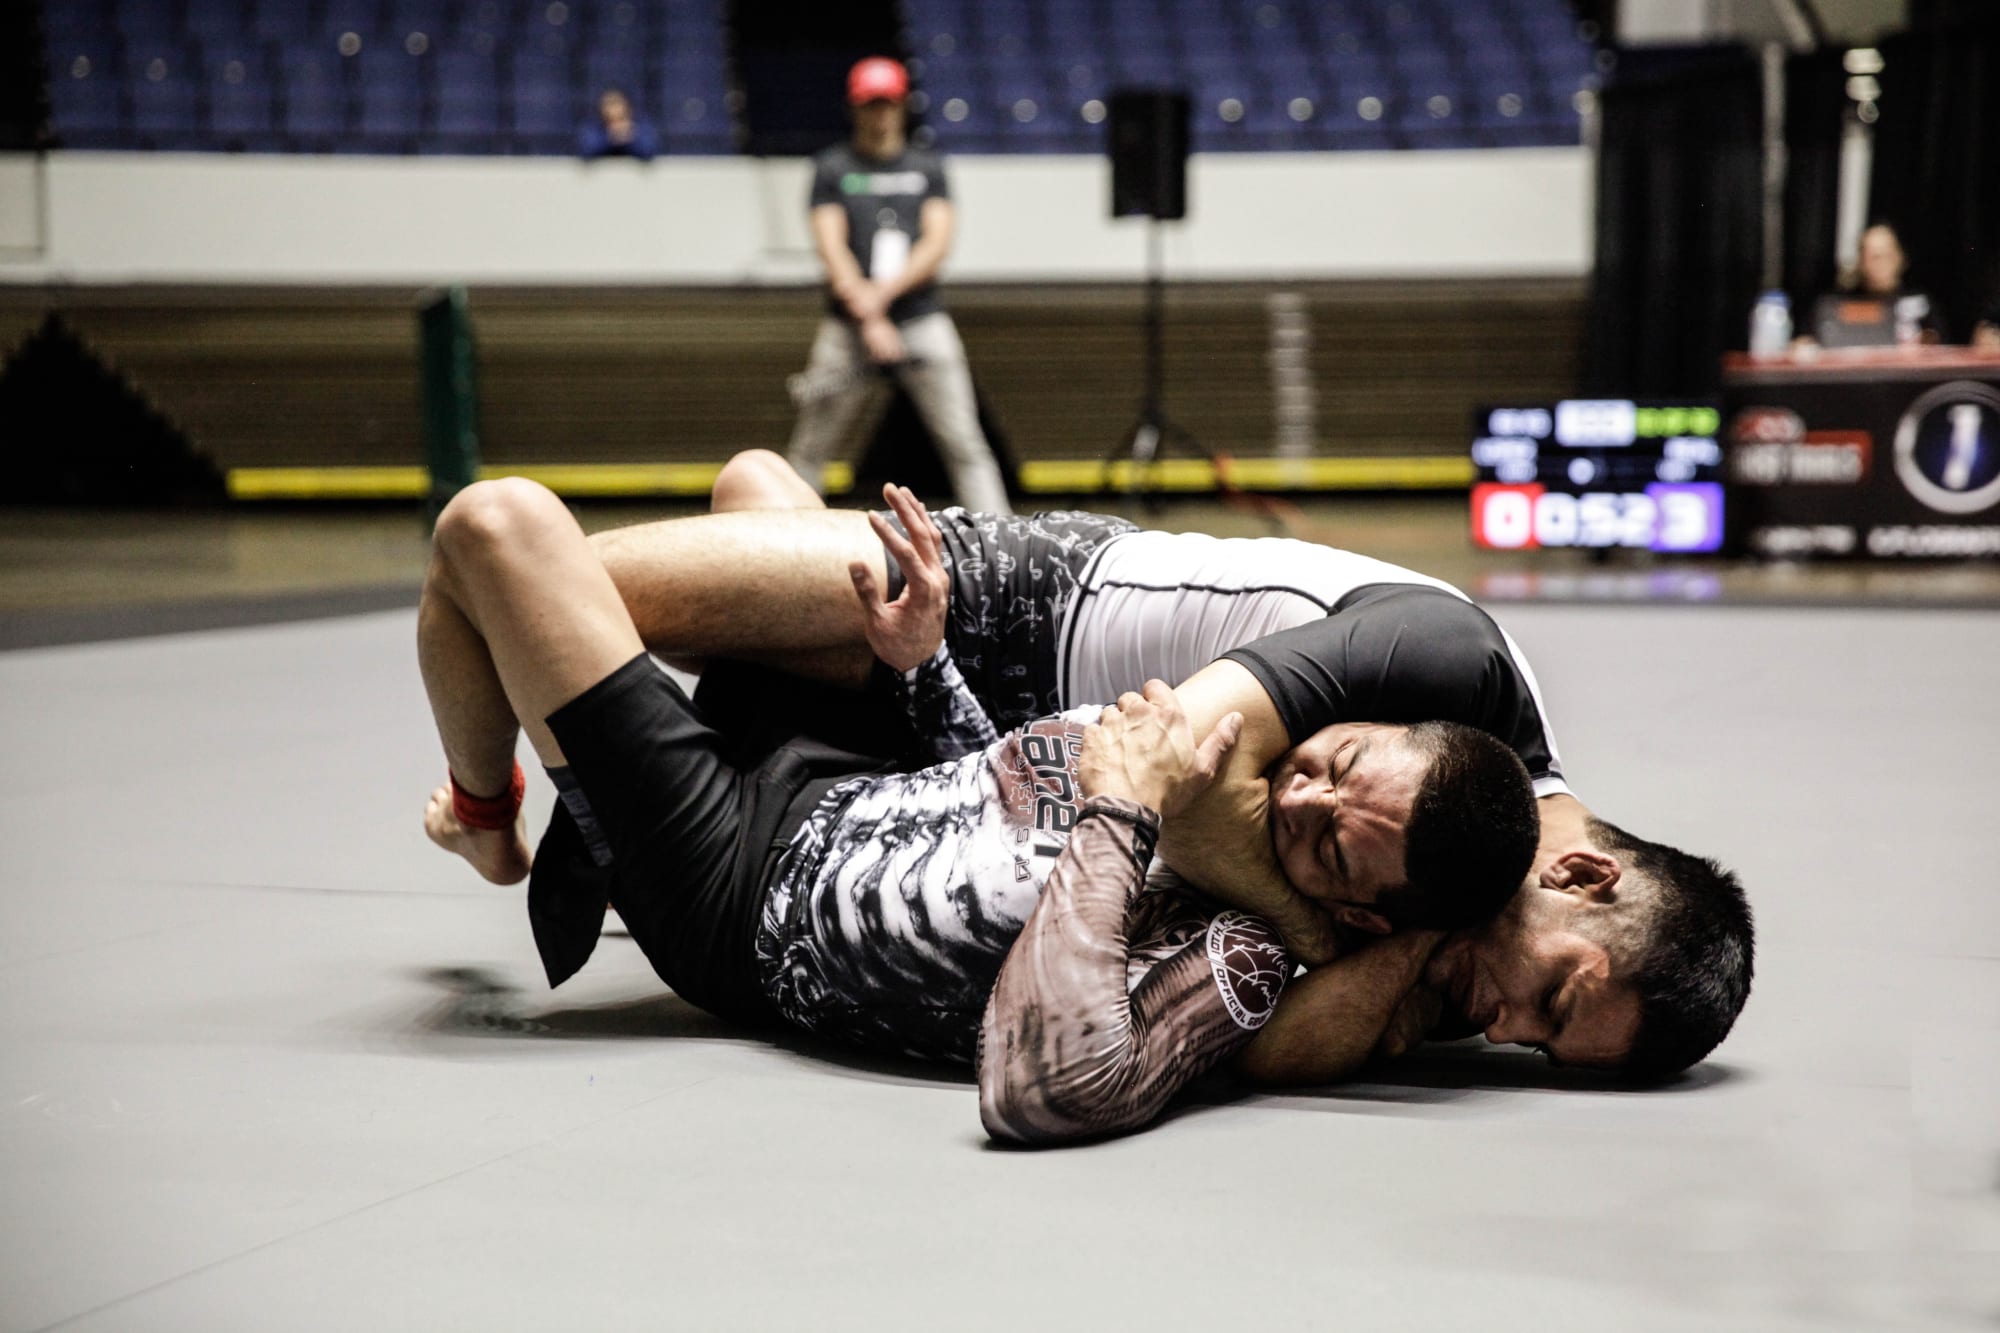 ADCC East Coast trials features several top names in grappling